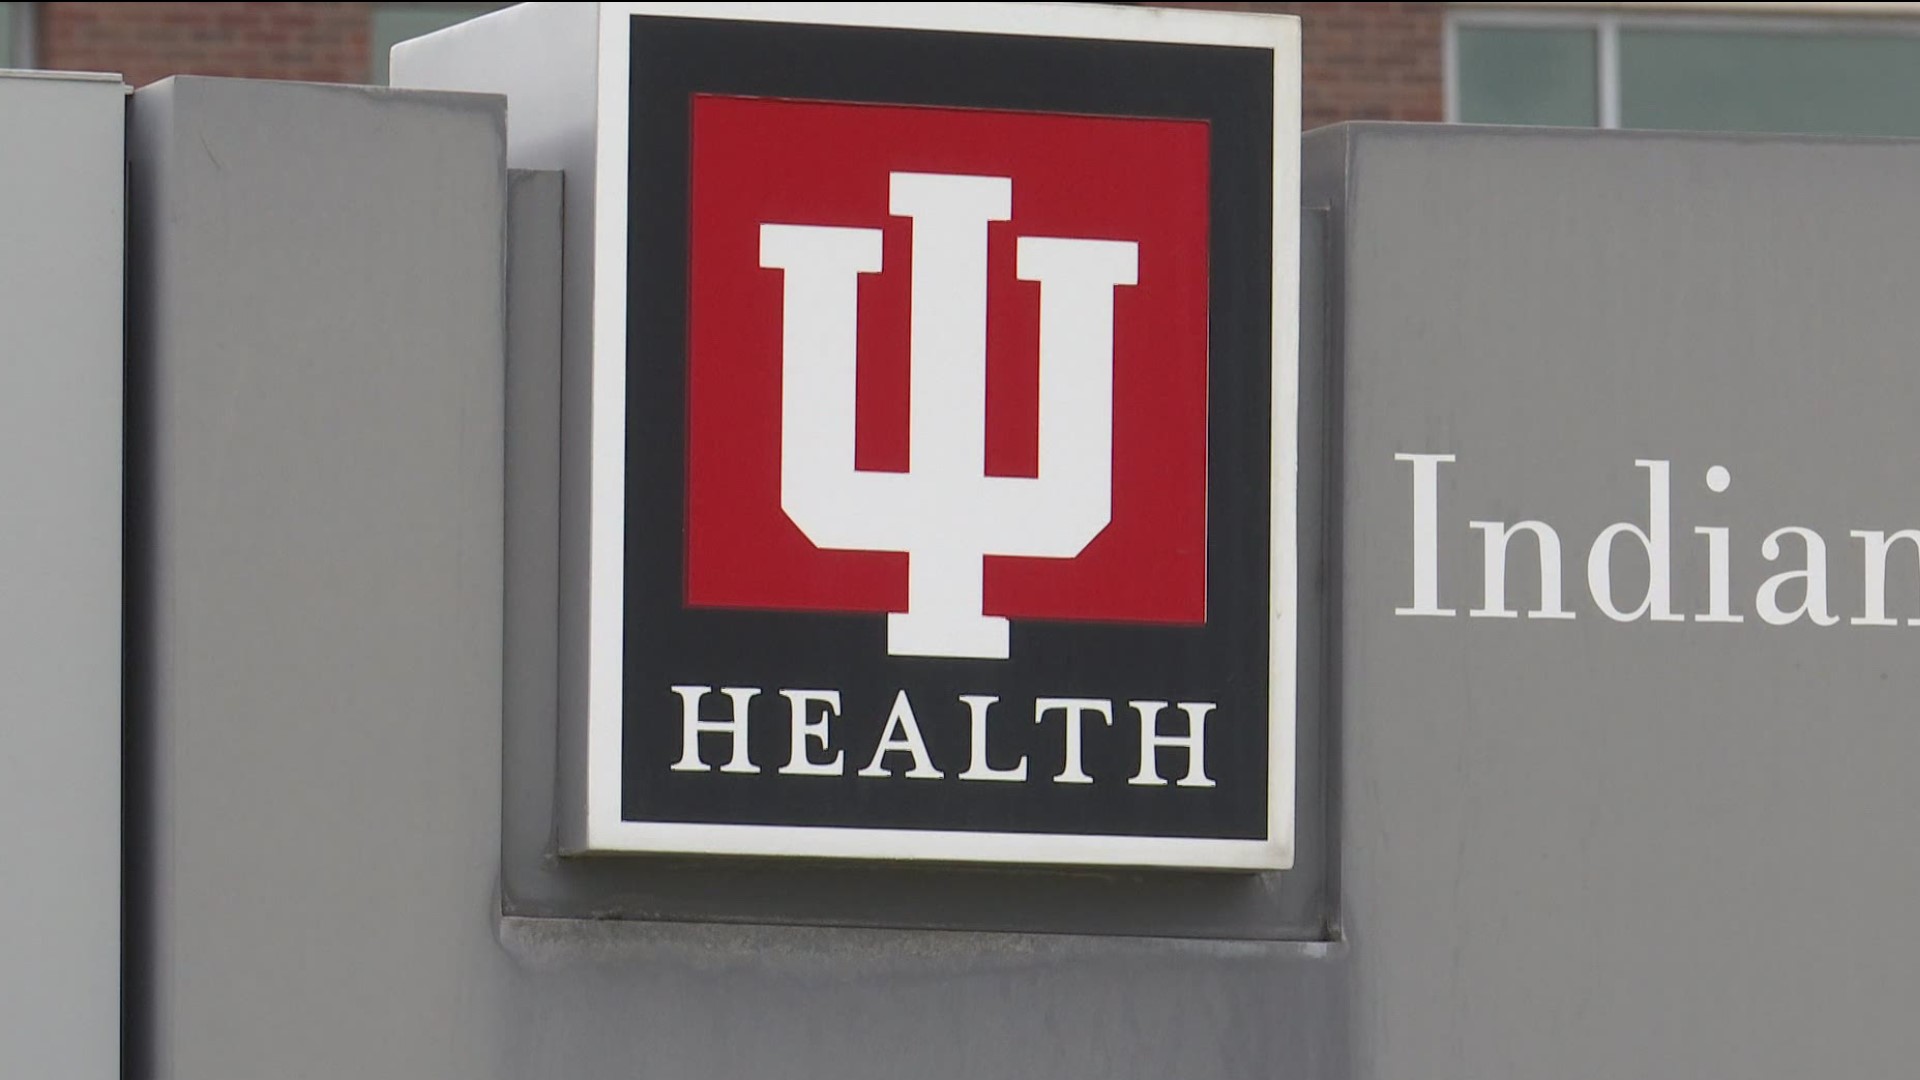 IU Health had set a deadline of Sept. 1 for employees to be fully vaccinated against COVID-19.